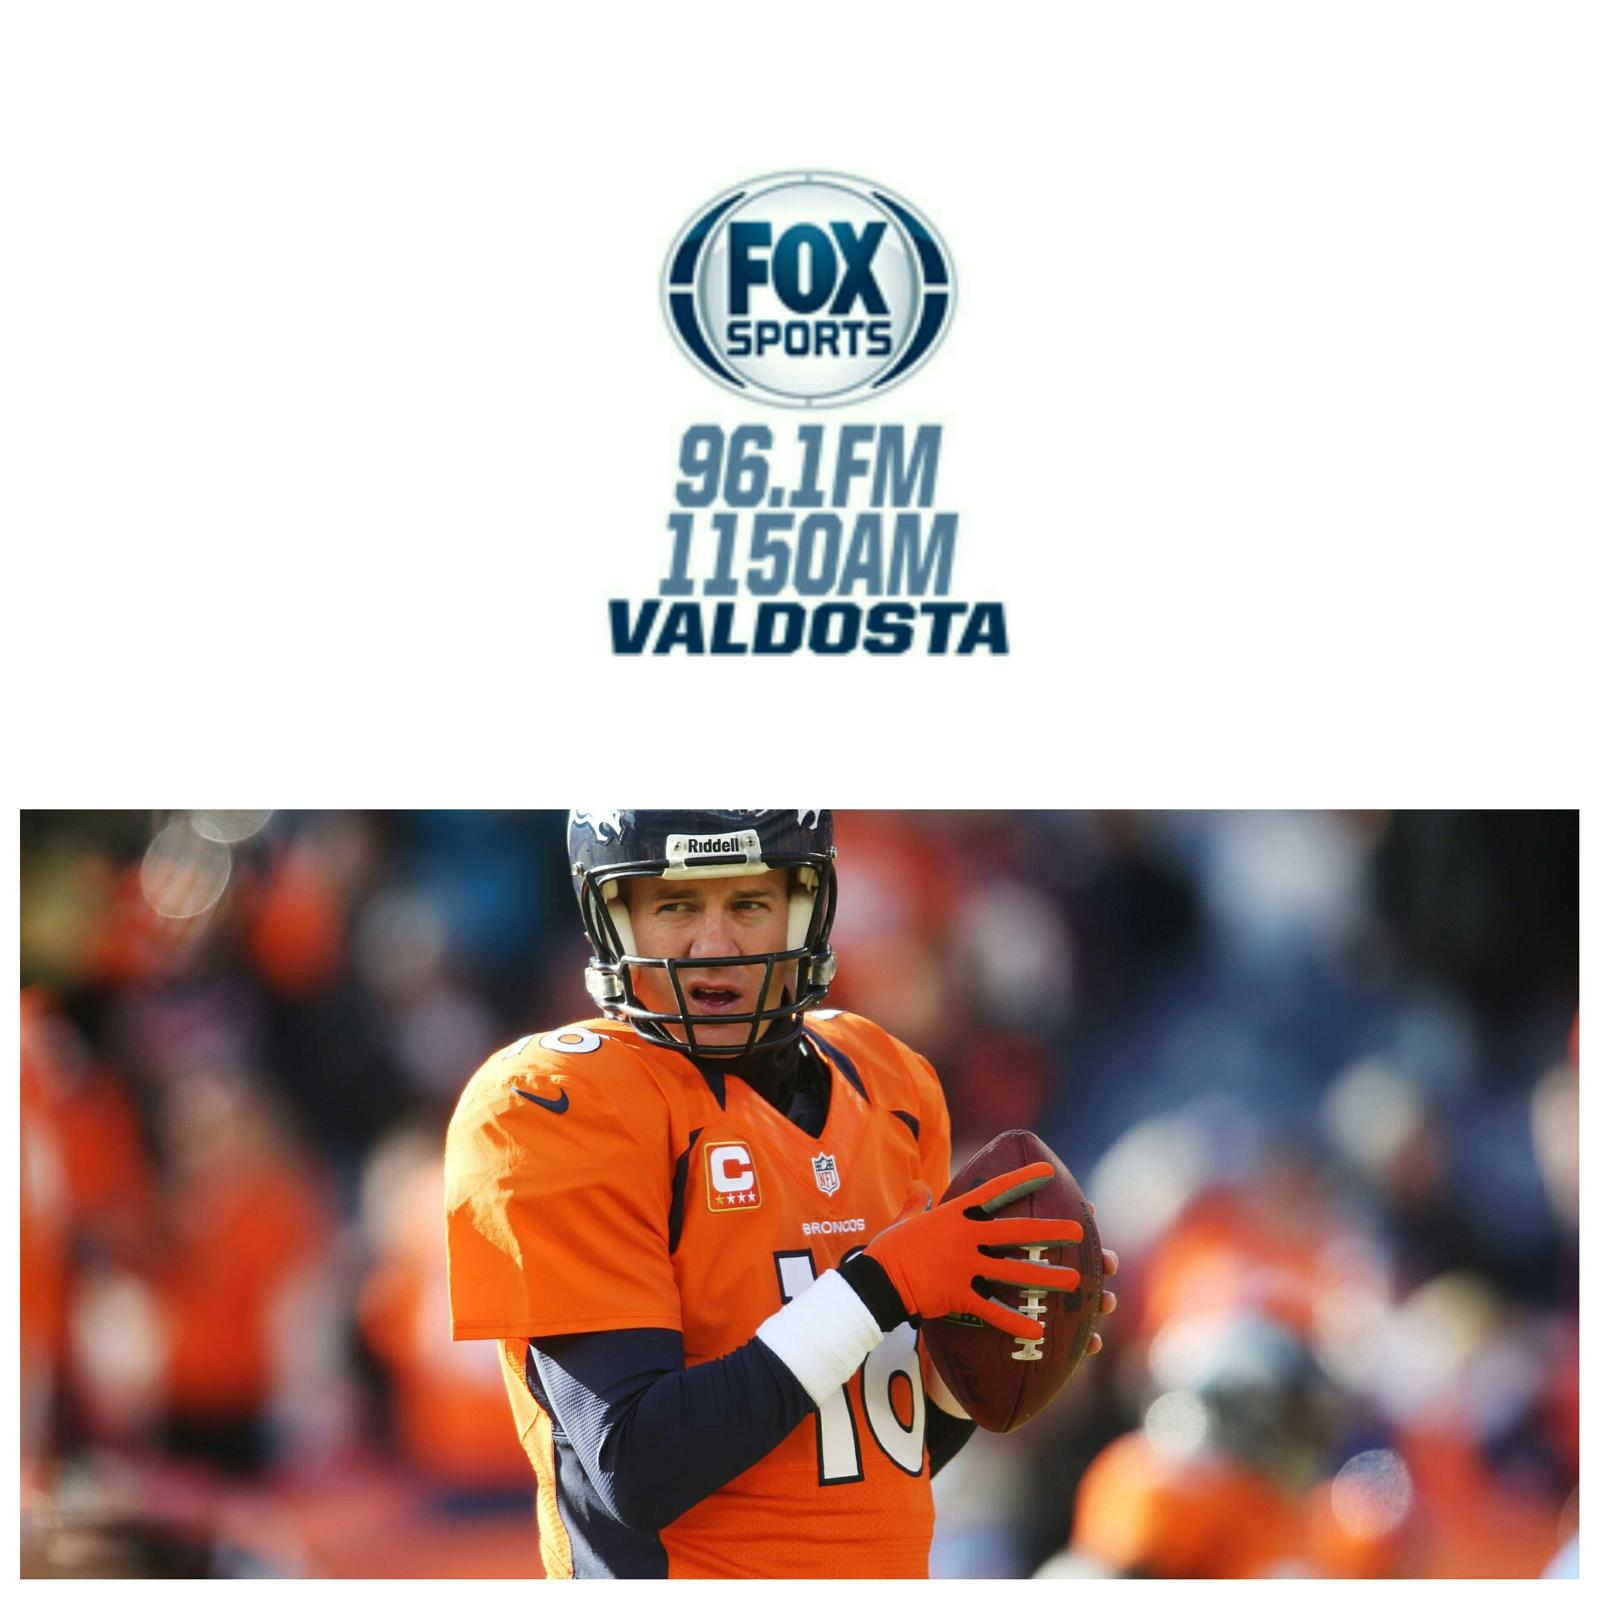 Fox Sports 1150 AM: (The Morning Drive) What Will Be the Key For Denver to Win Super Bowl 50?